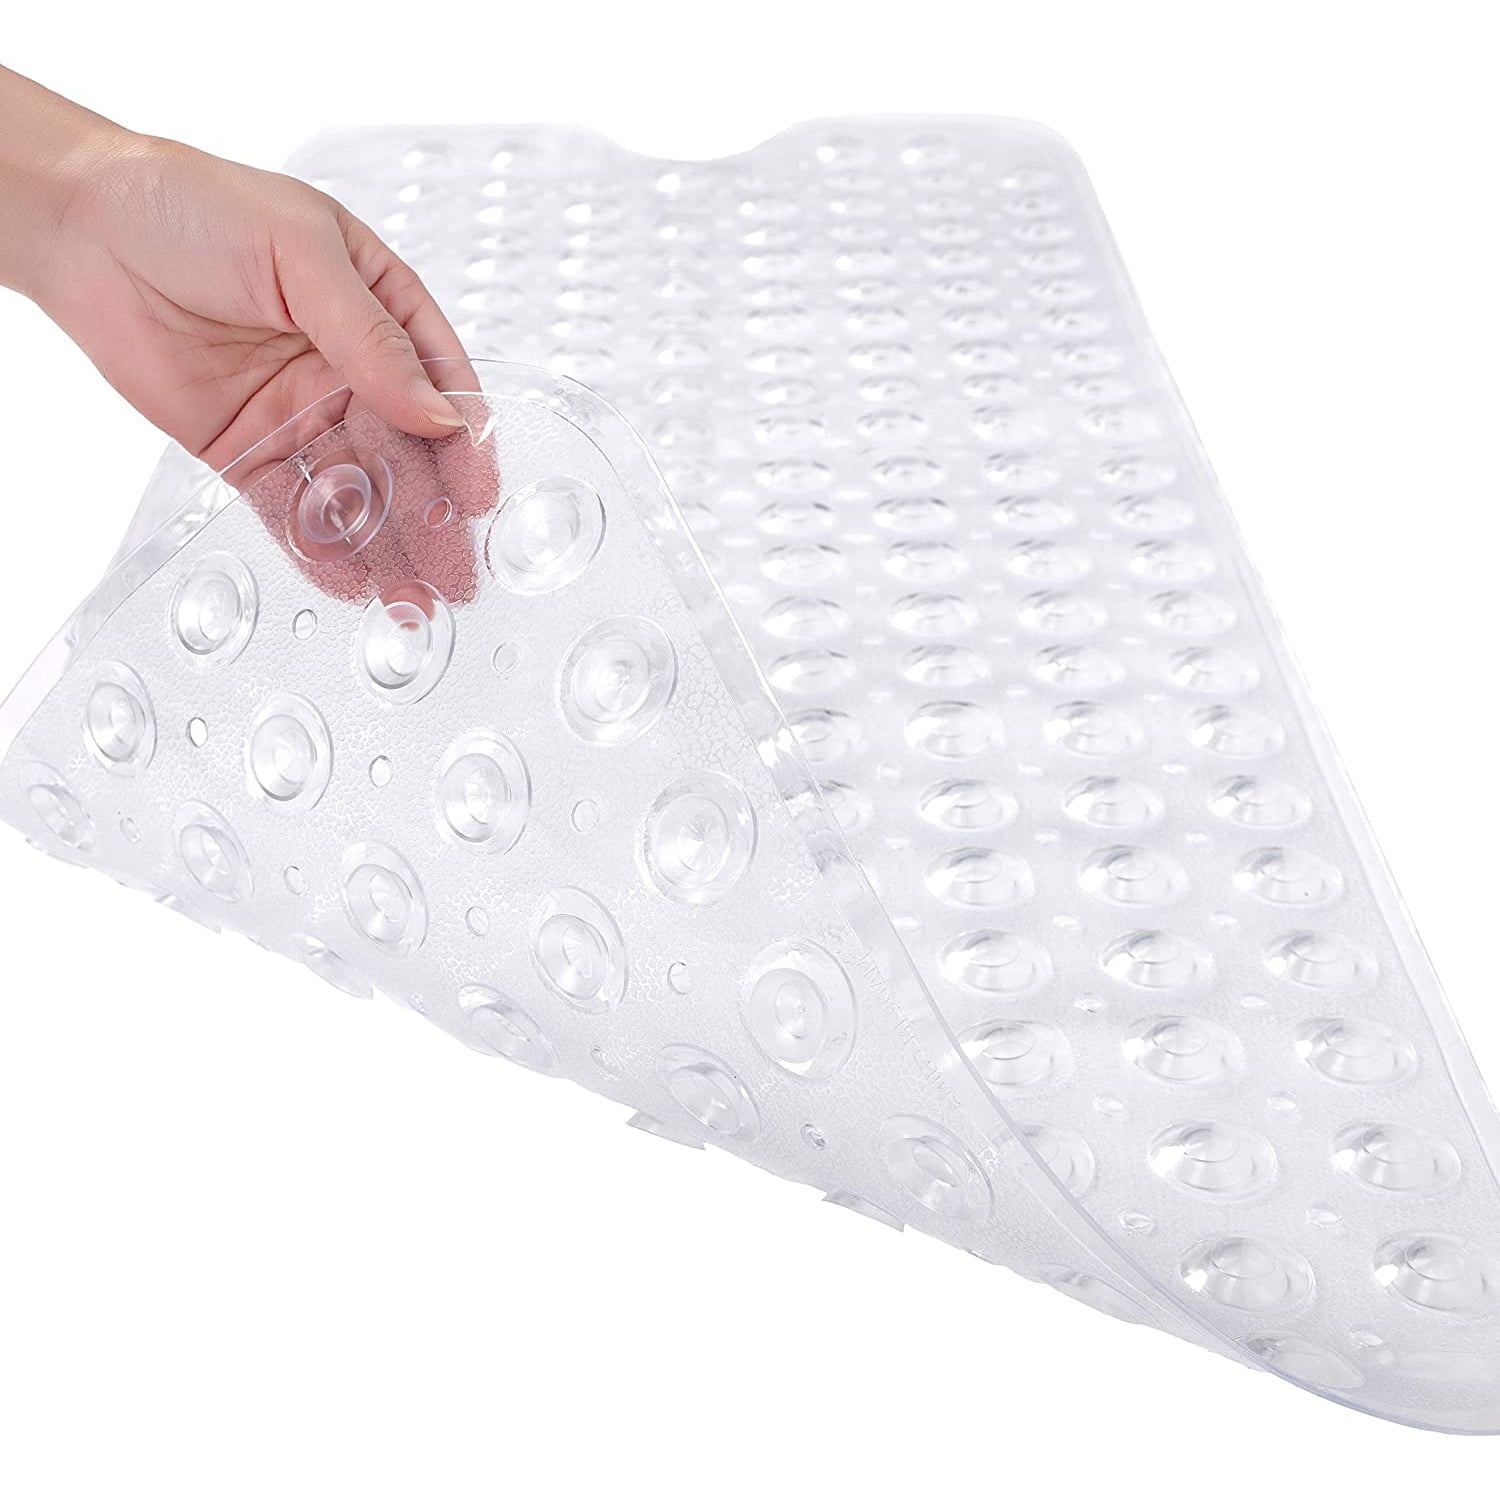  Non Slip Shower Mats Dual Anti-Slip Shower Mat Shower Mats for Inside  Shower, for Bathroom, Kitchen Floor with Resilience Suction Cups (Color :  E-4pcs, Size : 30x30cm) : Home & Kitchen